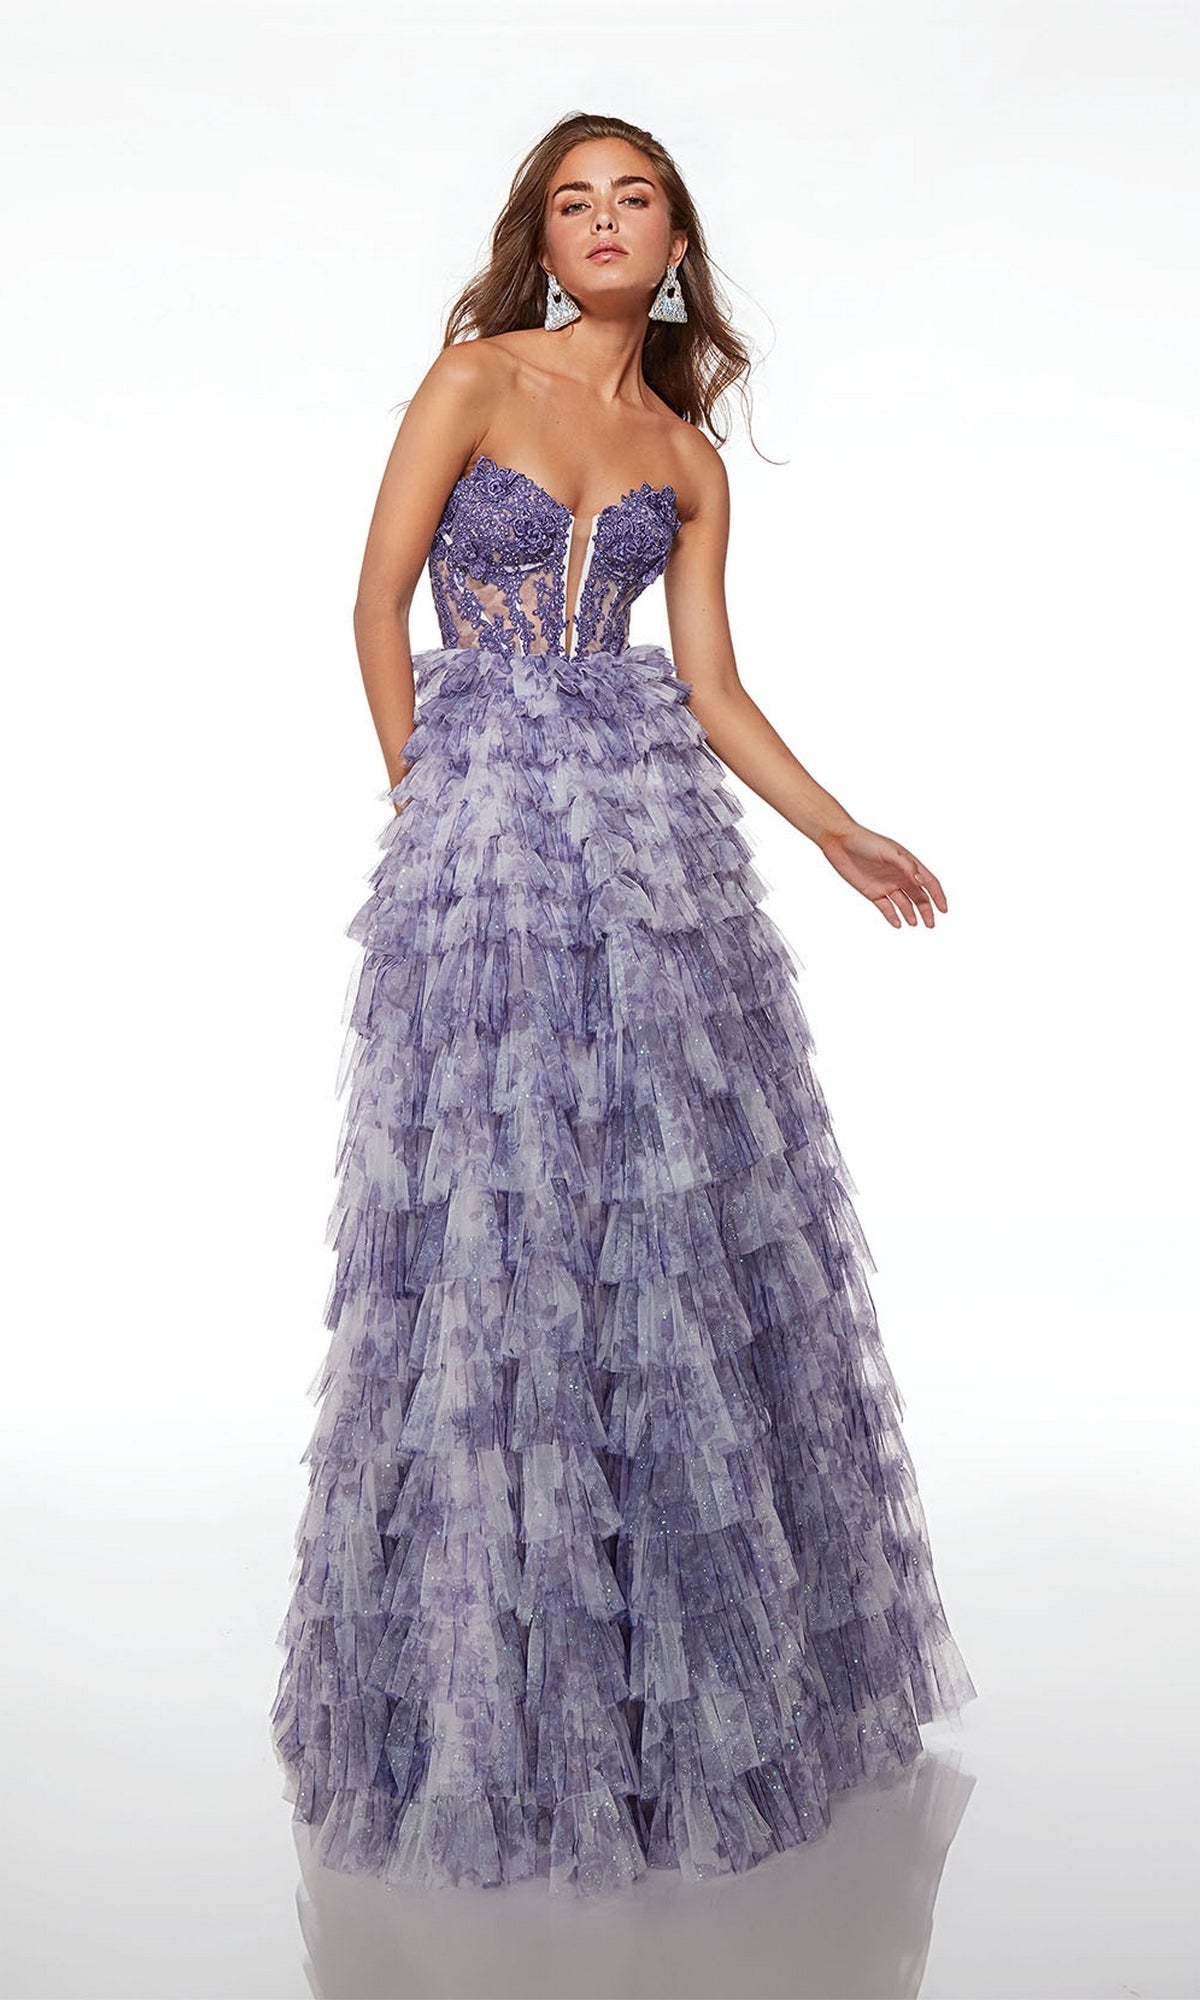 Alyce Strapless Ruffled Prom Ball Gown 61535